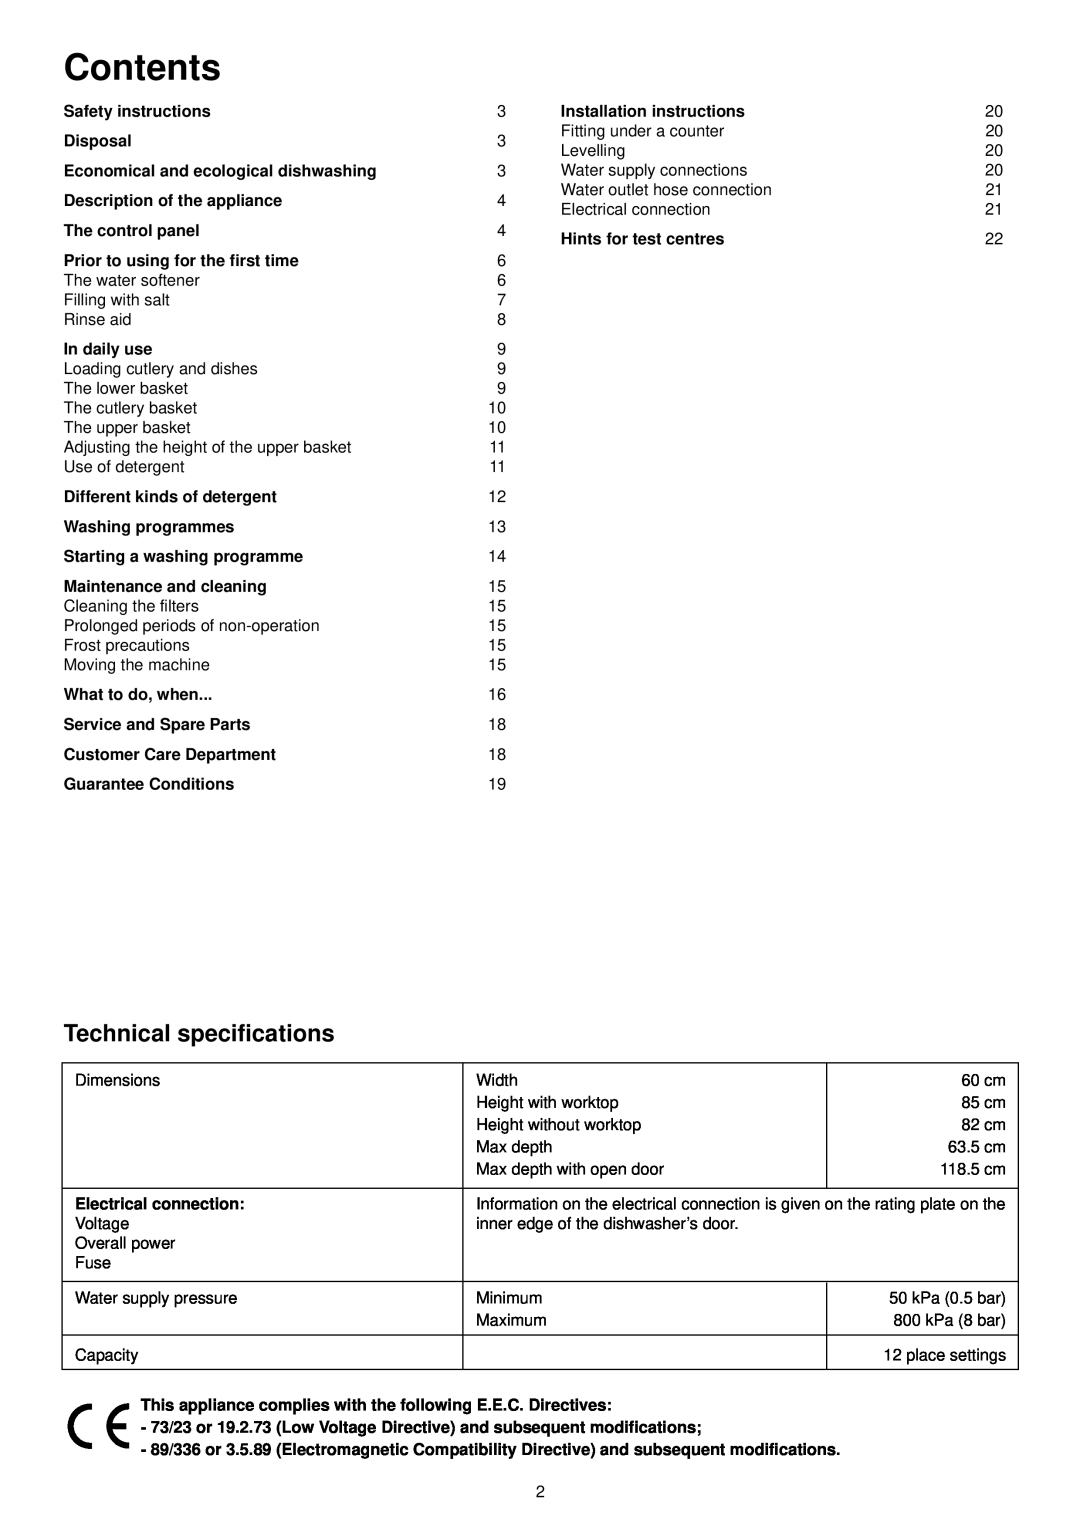 Zanussi ZSF 6160 manual Contents, Technical specifications 